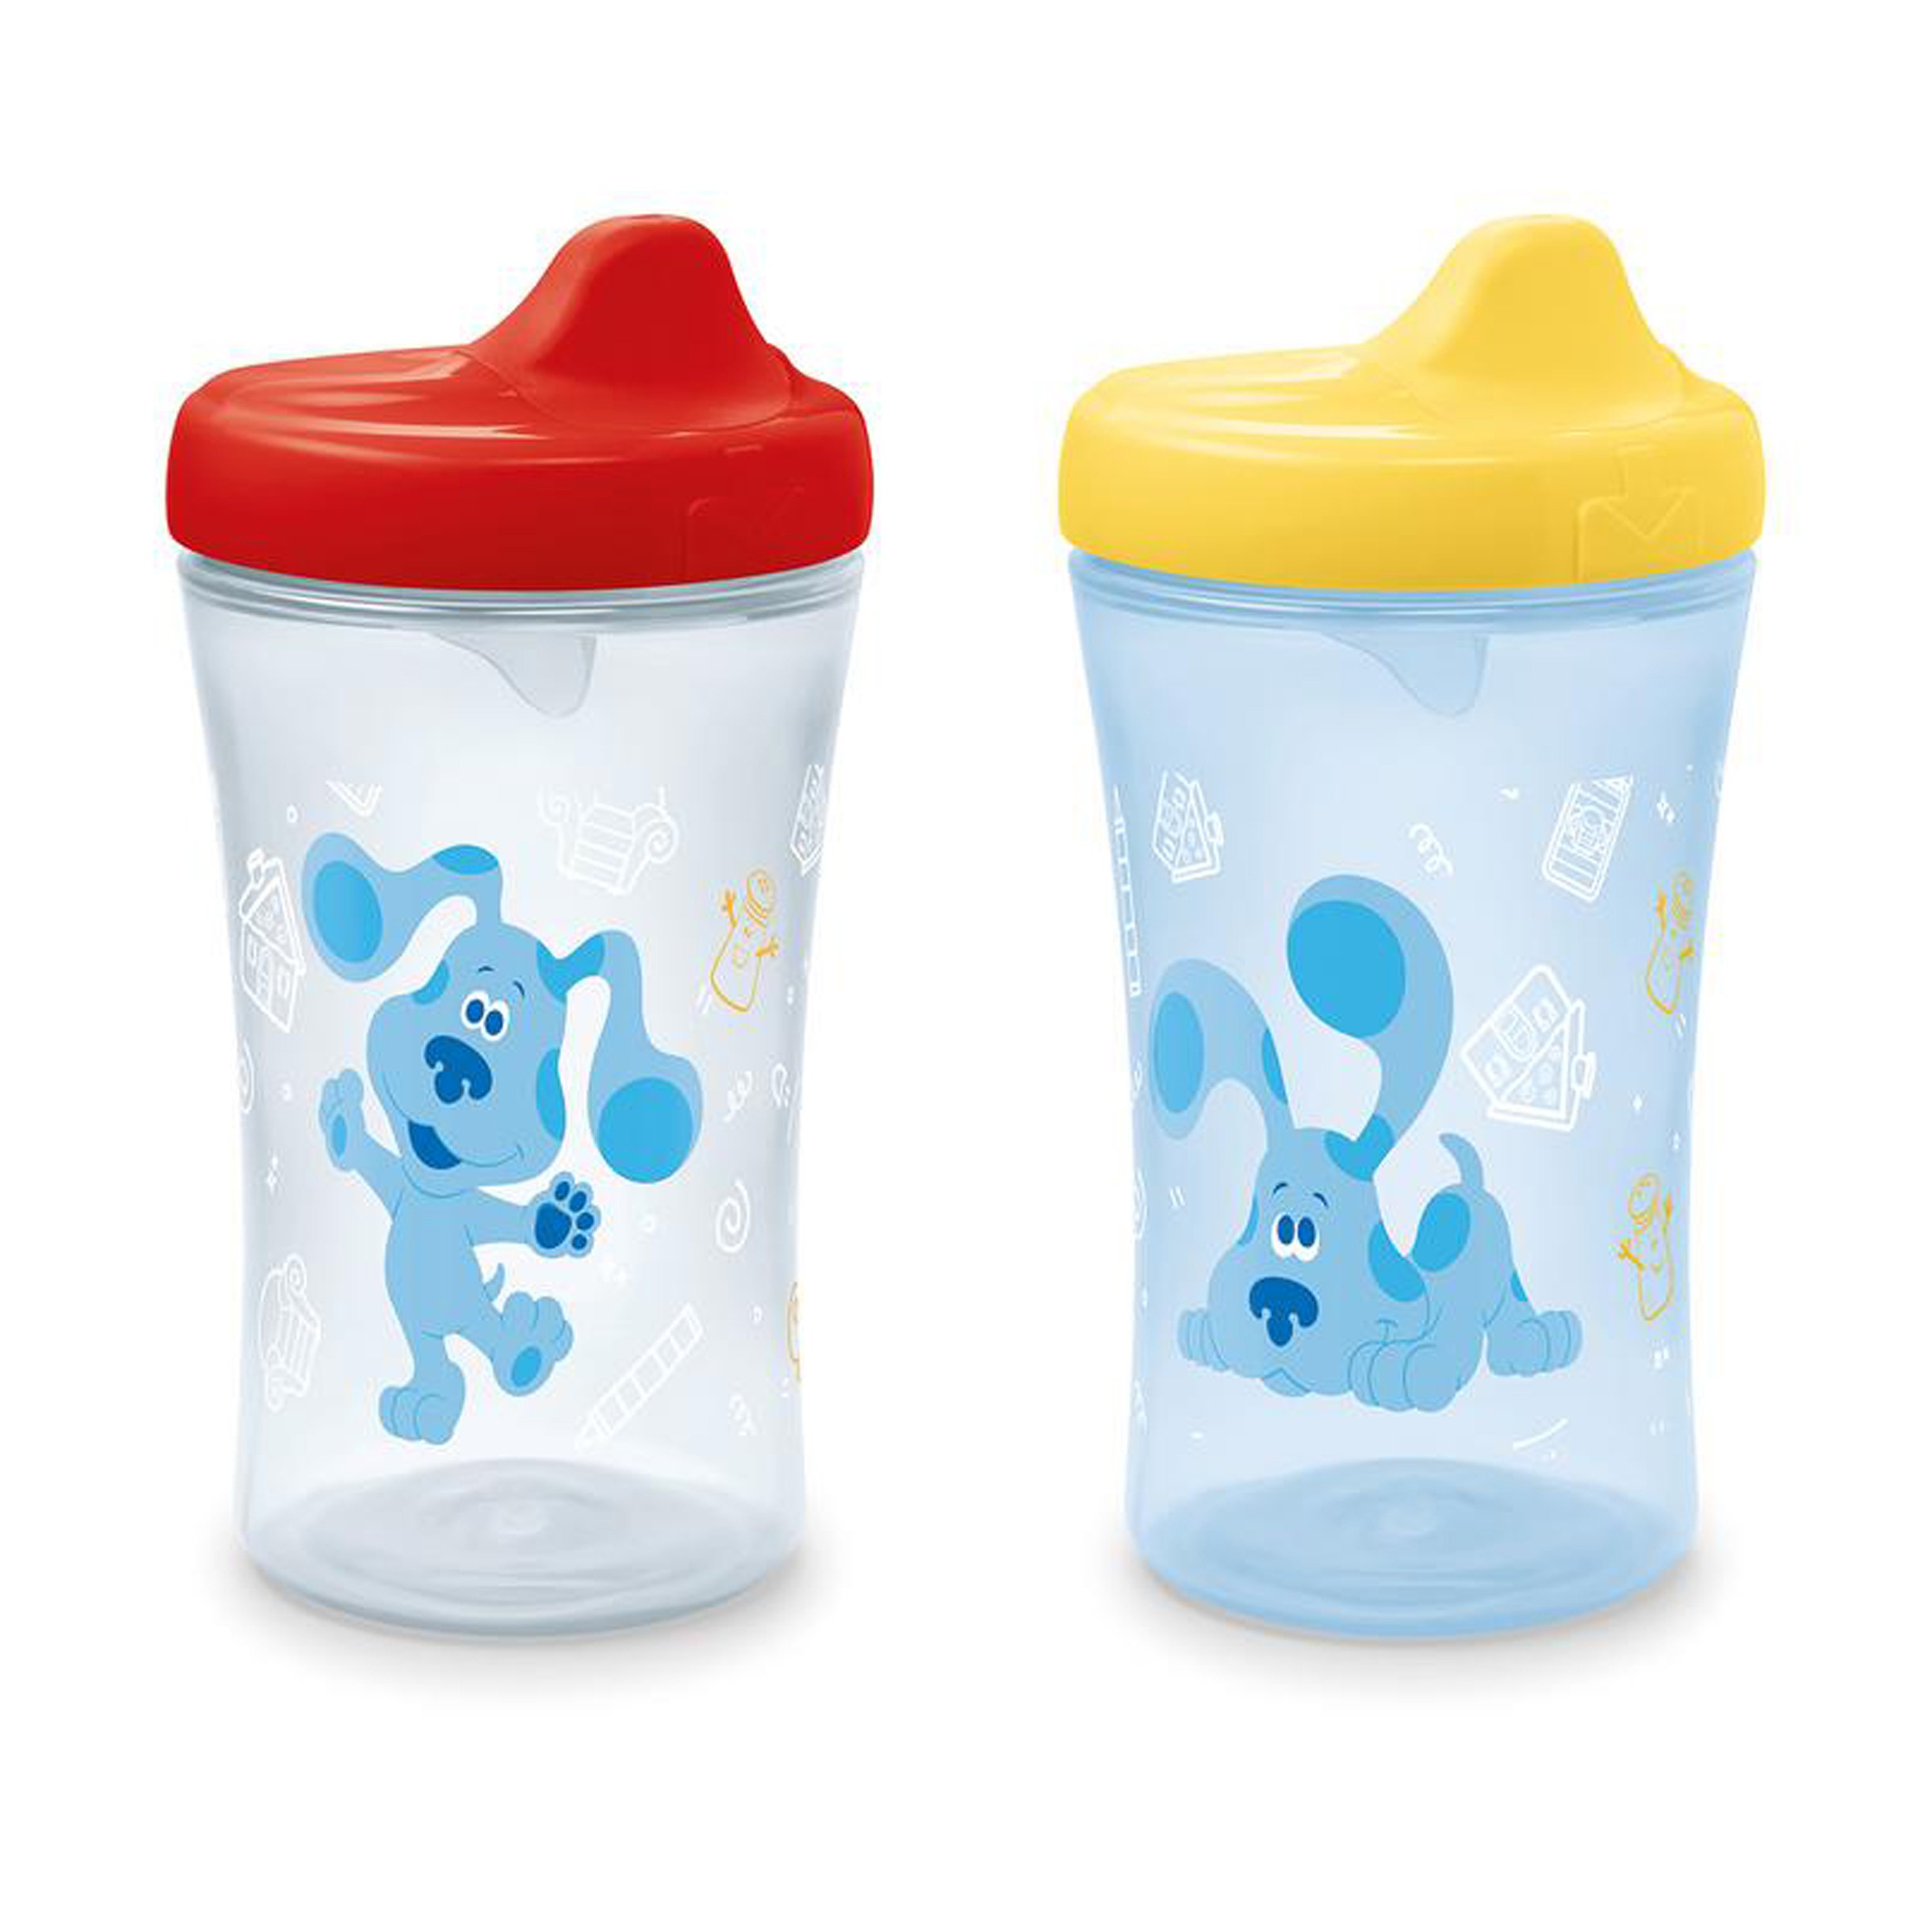 Printed Spill Proof Cups with Removable Valve (9 Oz.)